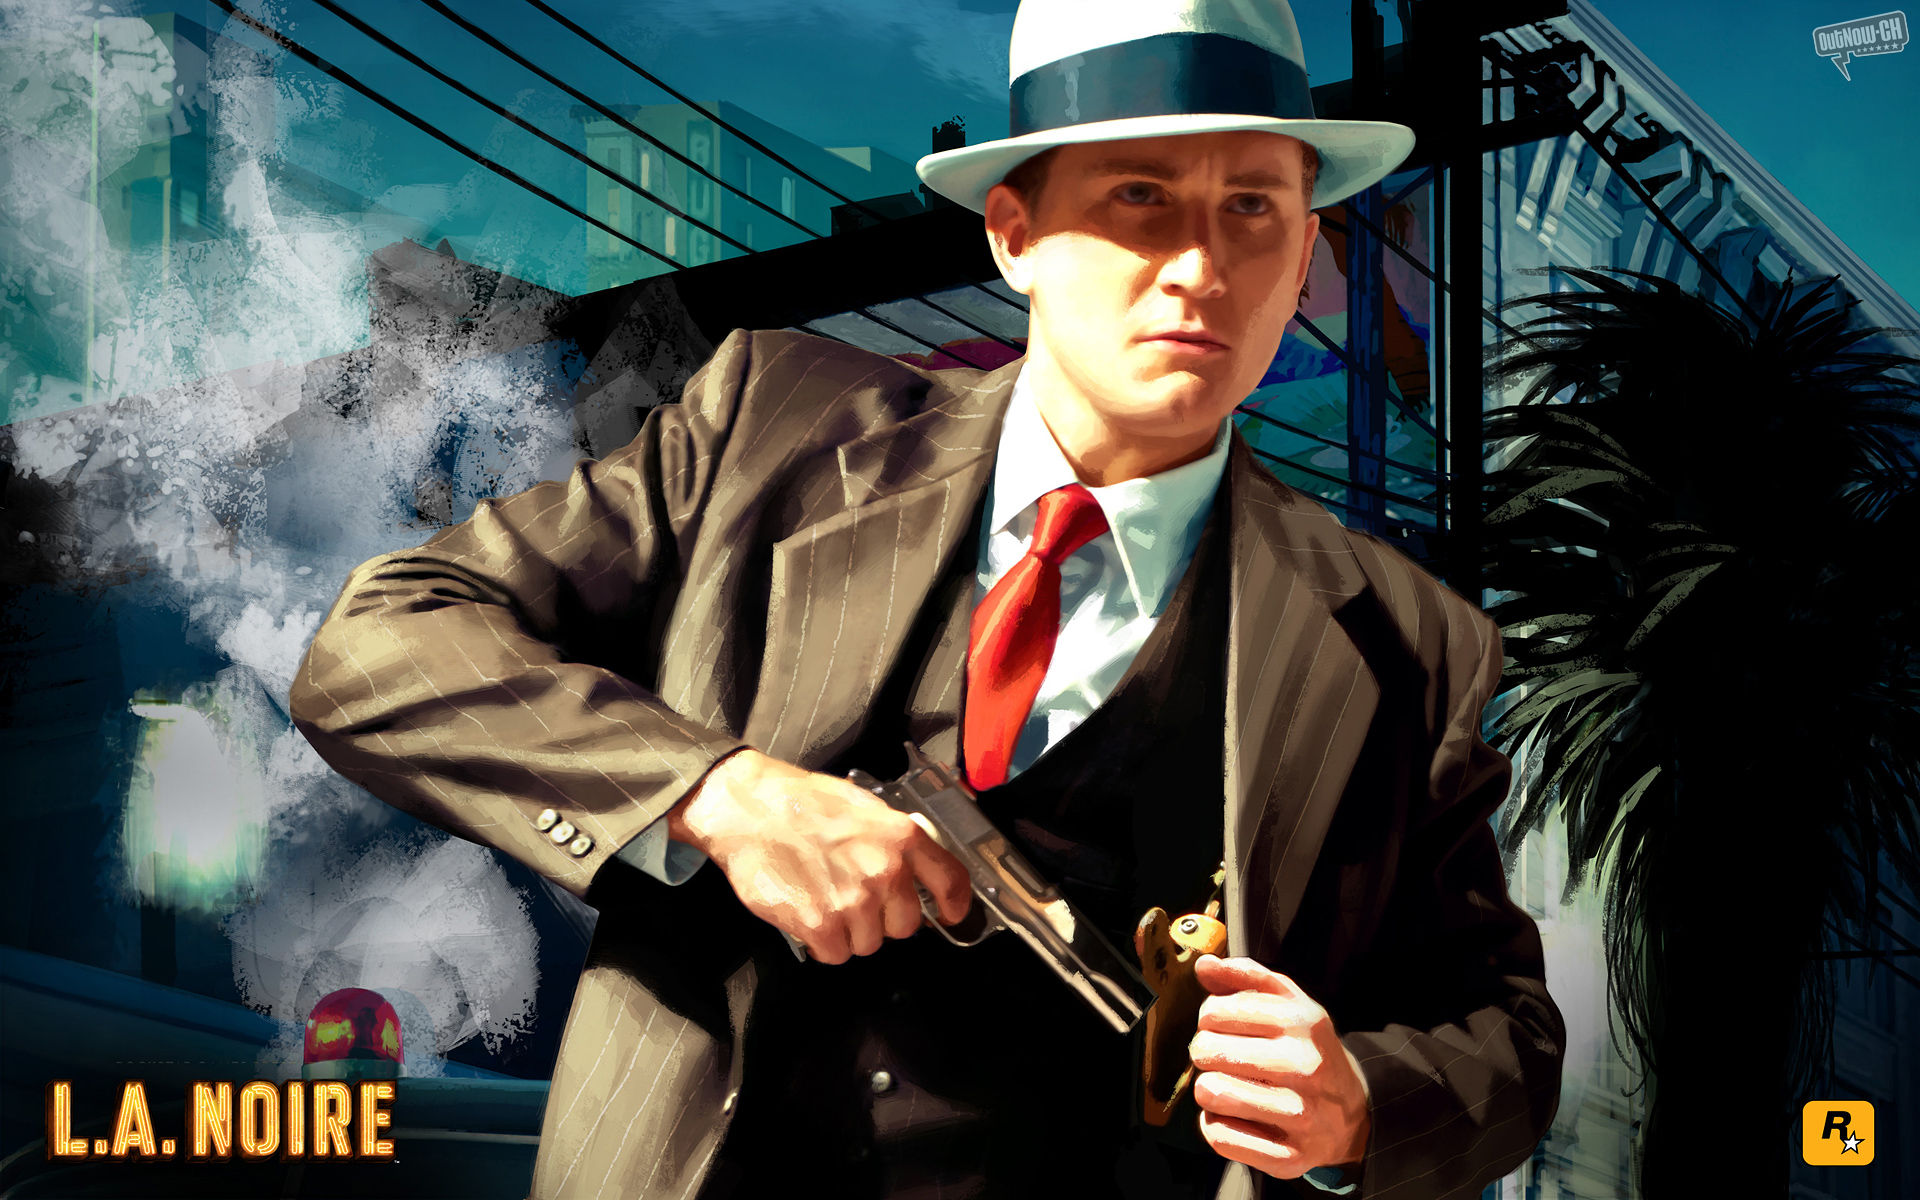 In this episode we discuss the ending of L.A. Noire and highlight some of the major turning points of Cole Phelps as a character.